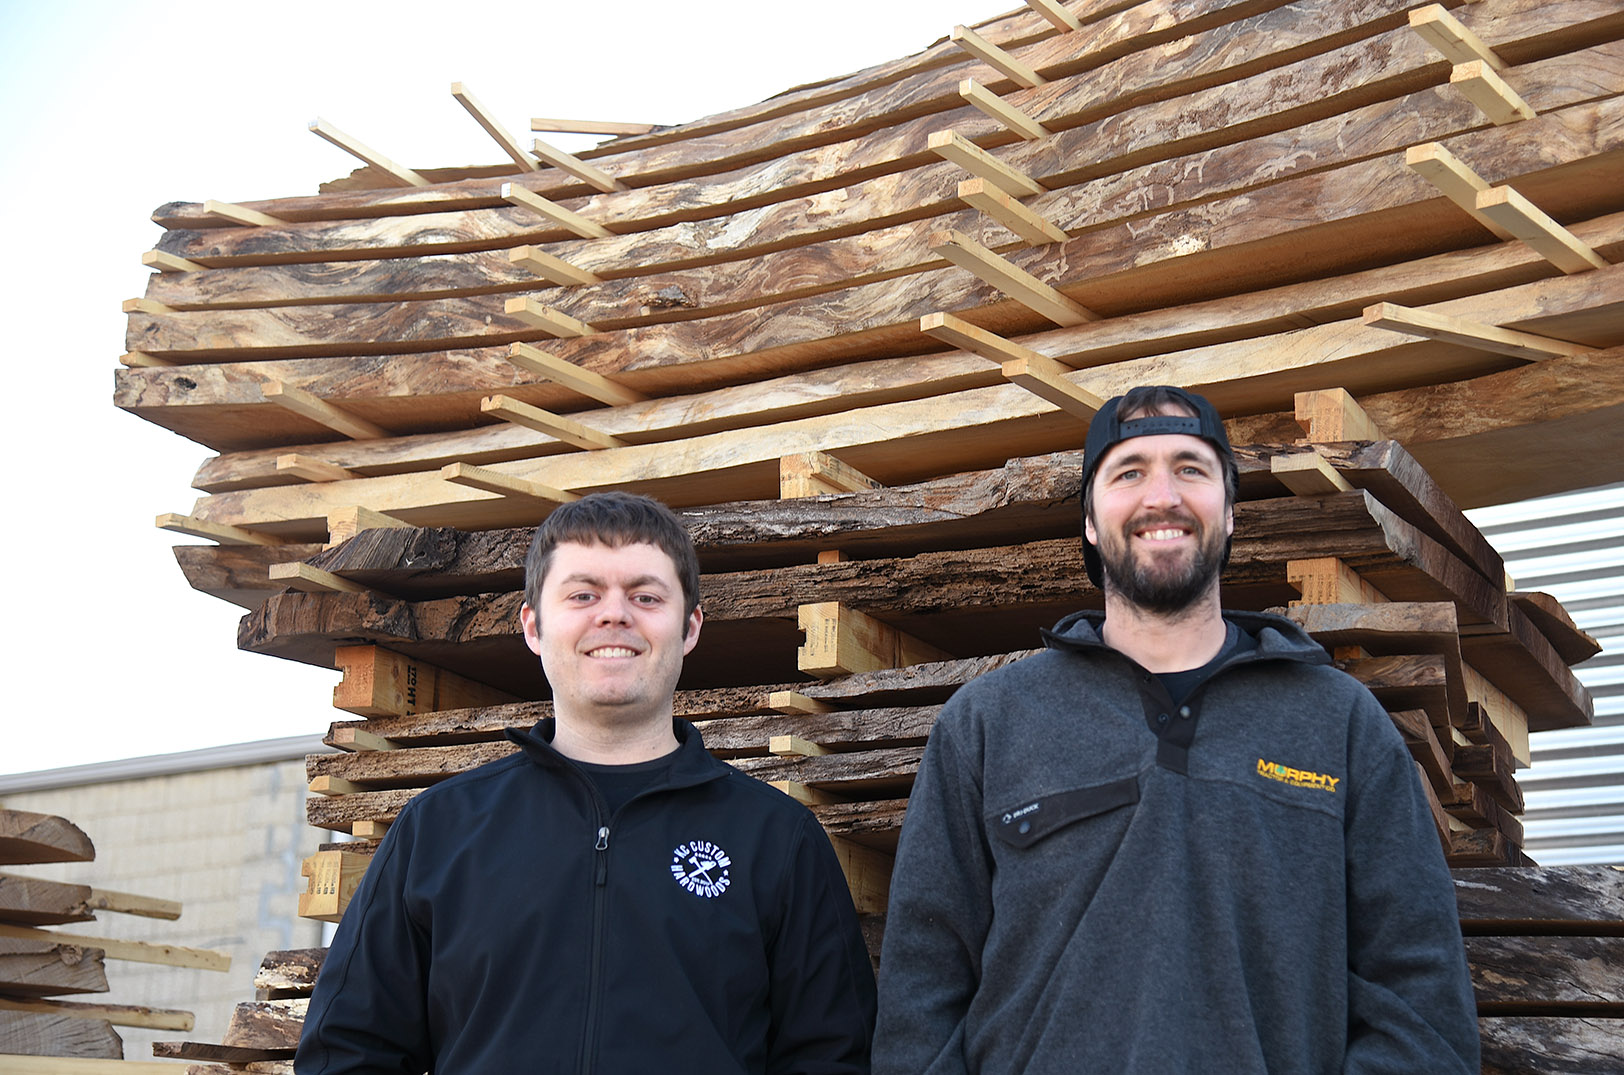 Trees might fall, but this duo’s salvaged, custom hardwood pieces are crafted to stand the test of time